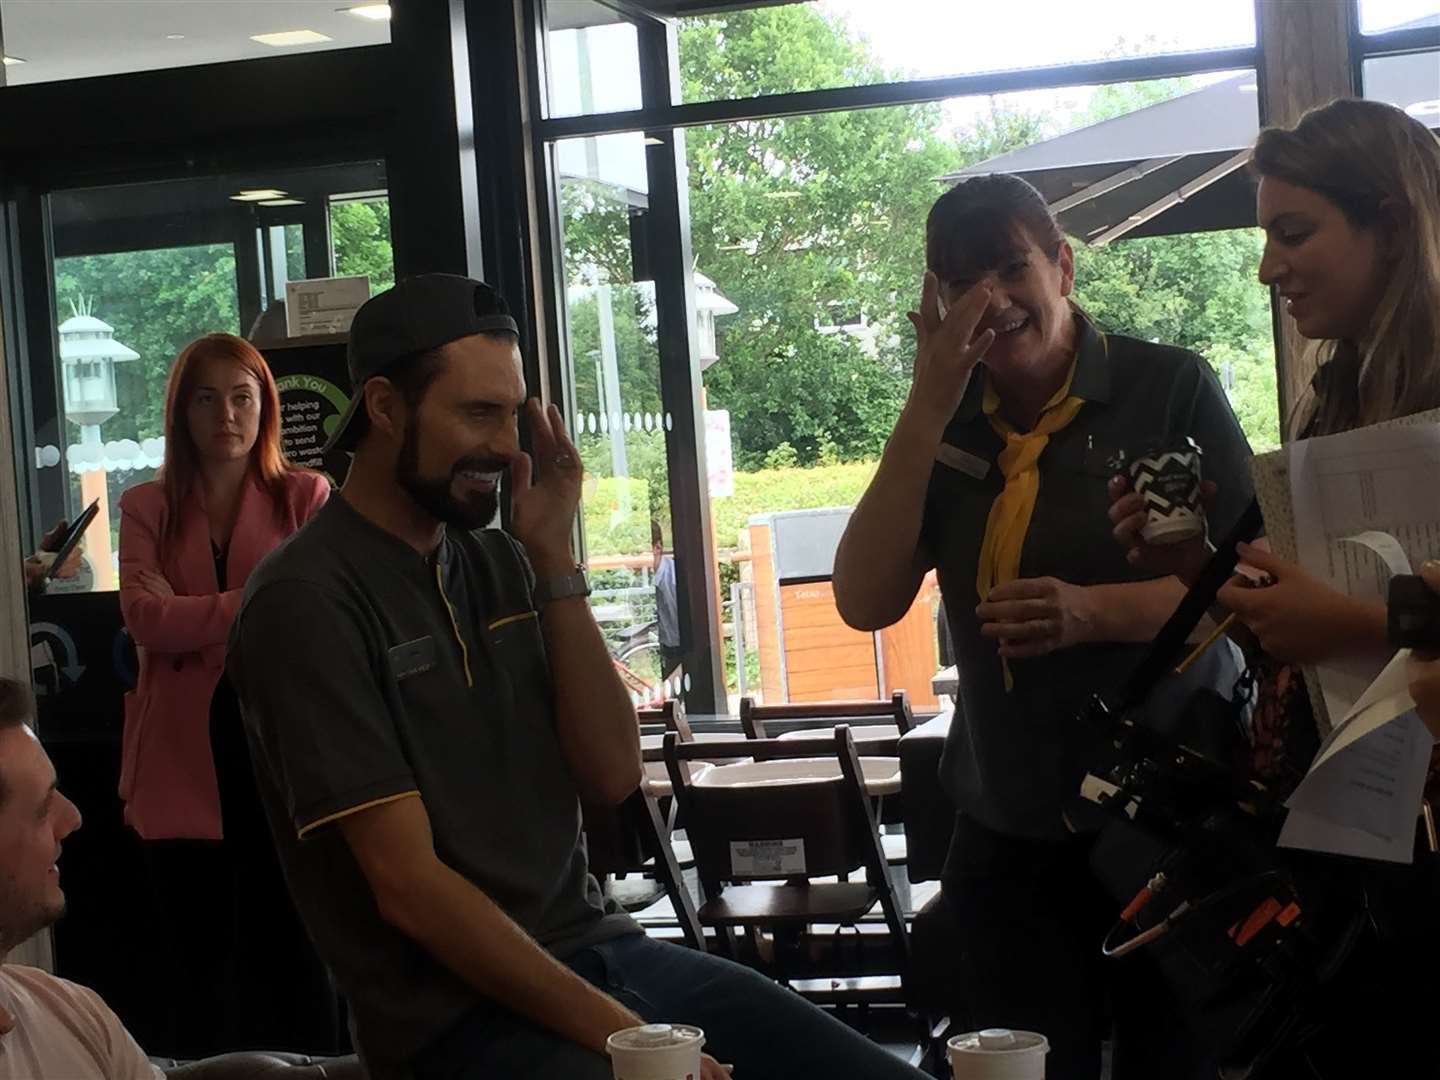 Rylan talking to customers and staff at the Orbital Park McDonald’s